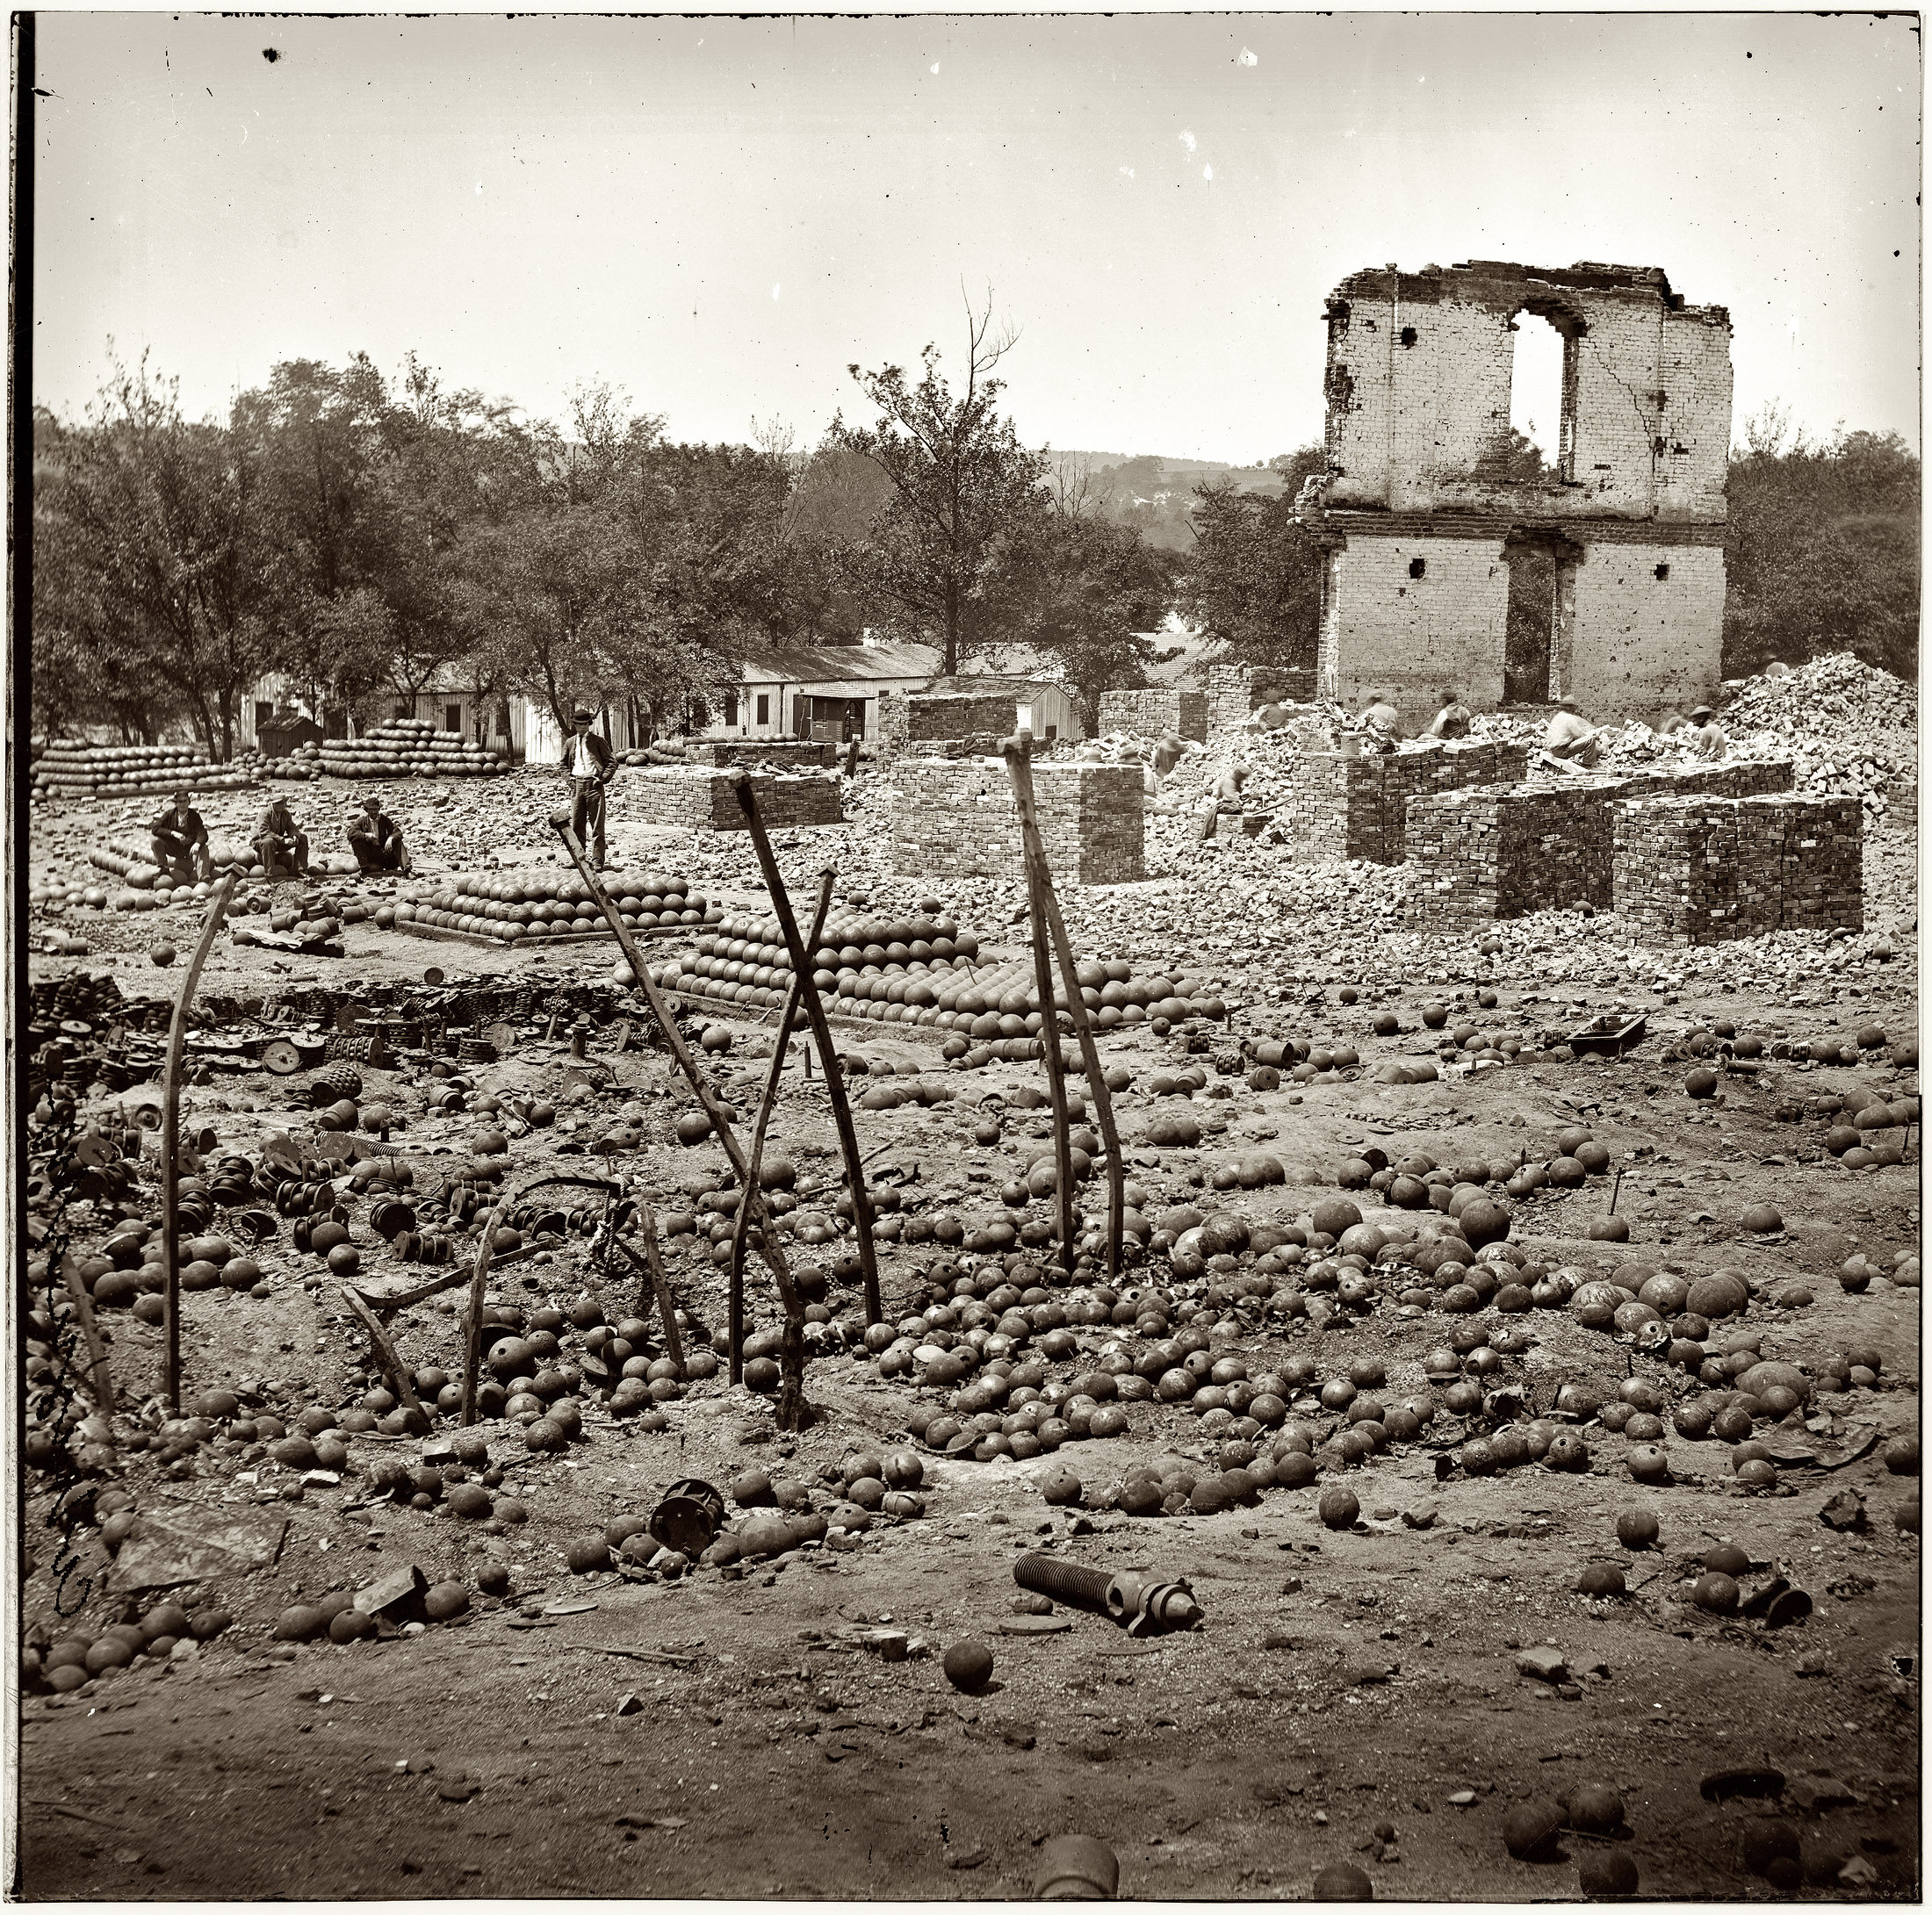 April 1865. Ruins of the State Arsenal at Richmond showing stacked and scattered ammunition. From photographs of the main Eastern theater of war after the fall of Richmond, compiled by Hirst Milhollen and Donald Mugridge. View full size.